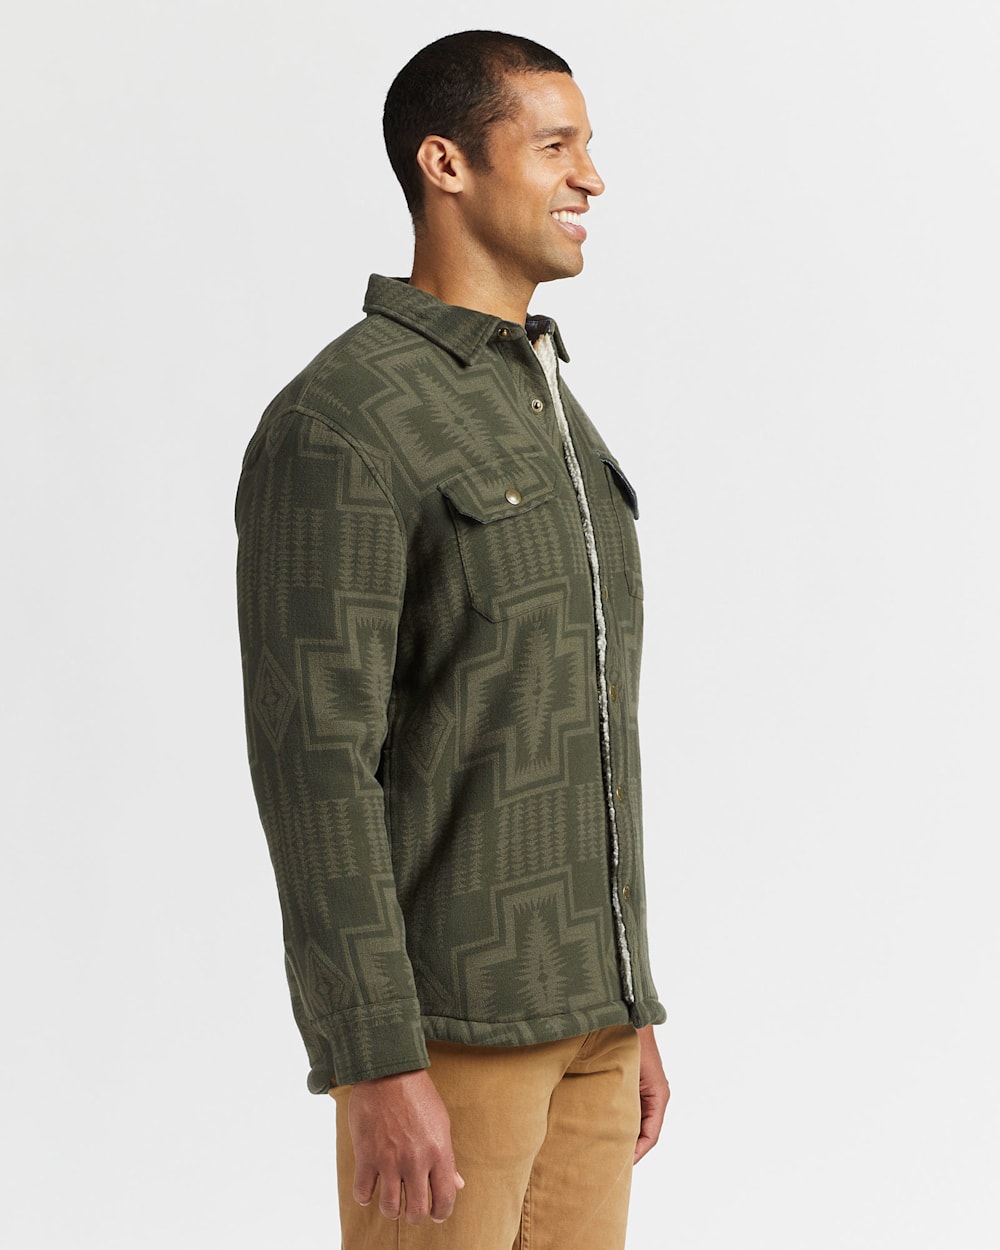 ALTERNATE VIEW OF MEN'S HARDING SHERPA-LINED SHIRT JACKET IN ARMY GREEN image number 2